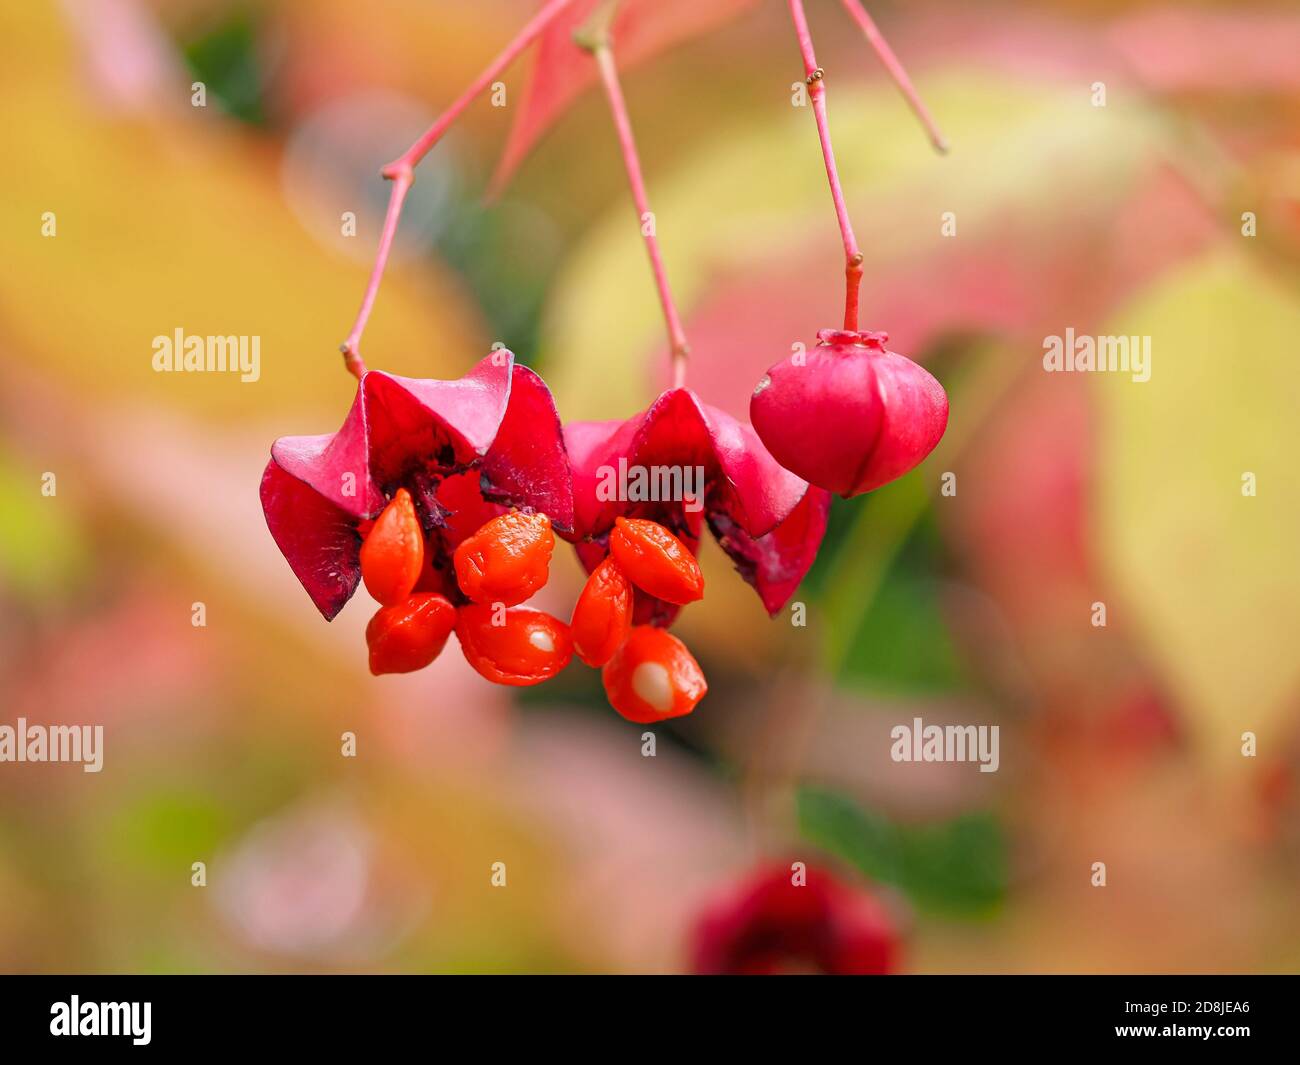 Closeup of bright red Euonymus maximowiczianus berries splitting open on a shrub Stock Photo